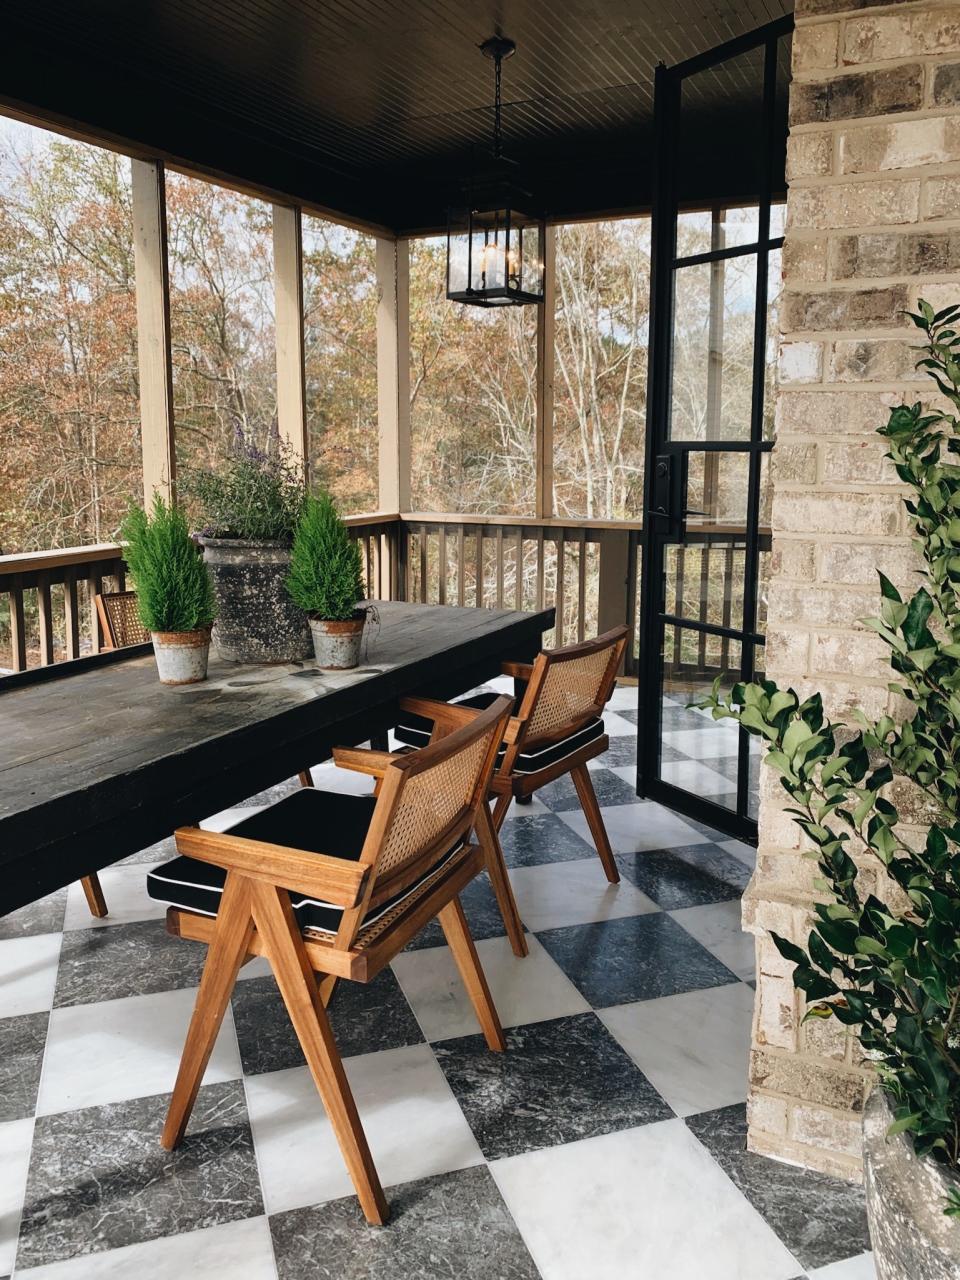 Seeing Brent’s use of materials for his screened-in porch made me think beyond basic planks of wood. From the checkered tiles to the painted ceiling, there are so many aesthetic considerations to make an outdoor space an extension of your interior home.